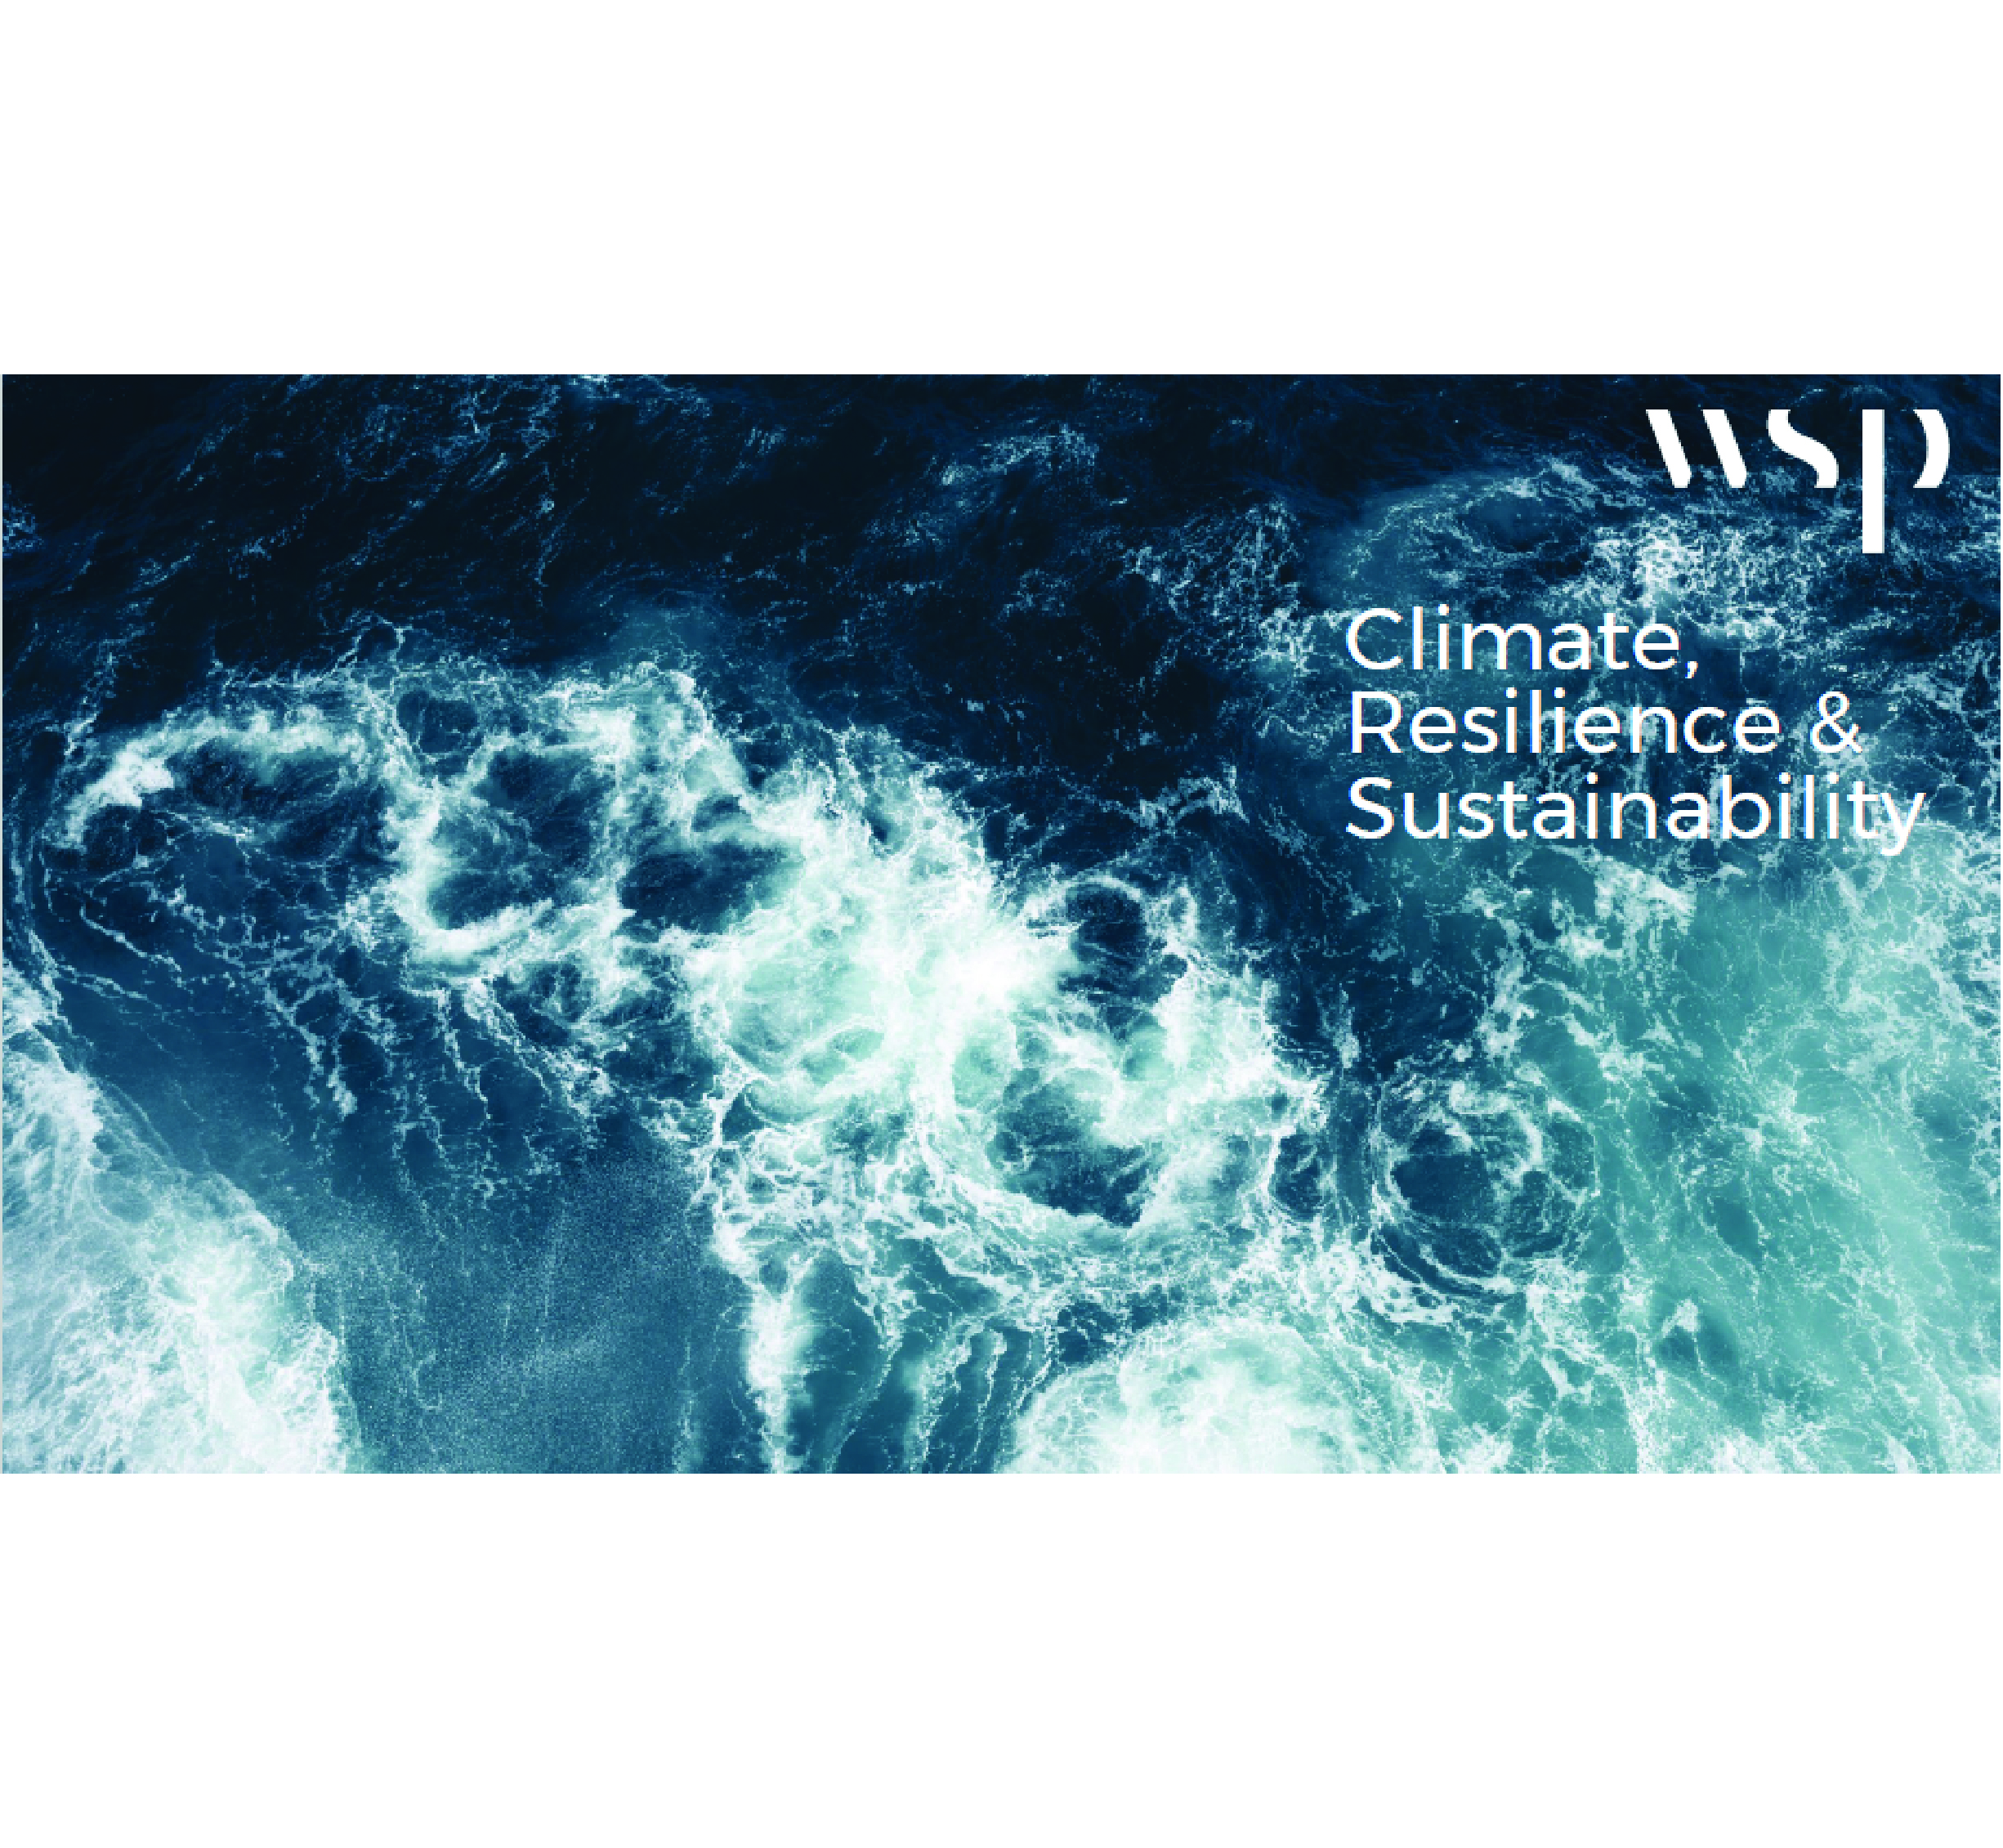 WSP’s Climate, Resilience & Sustainability